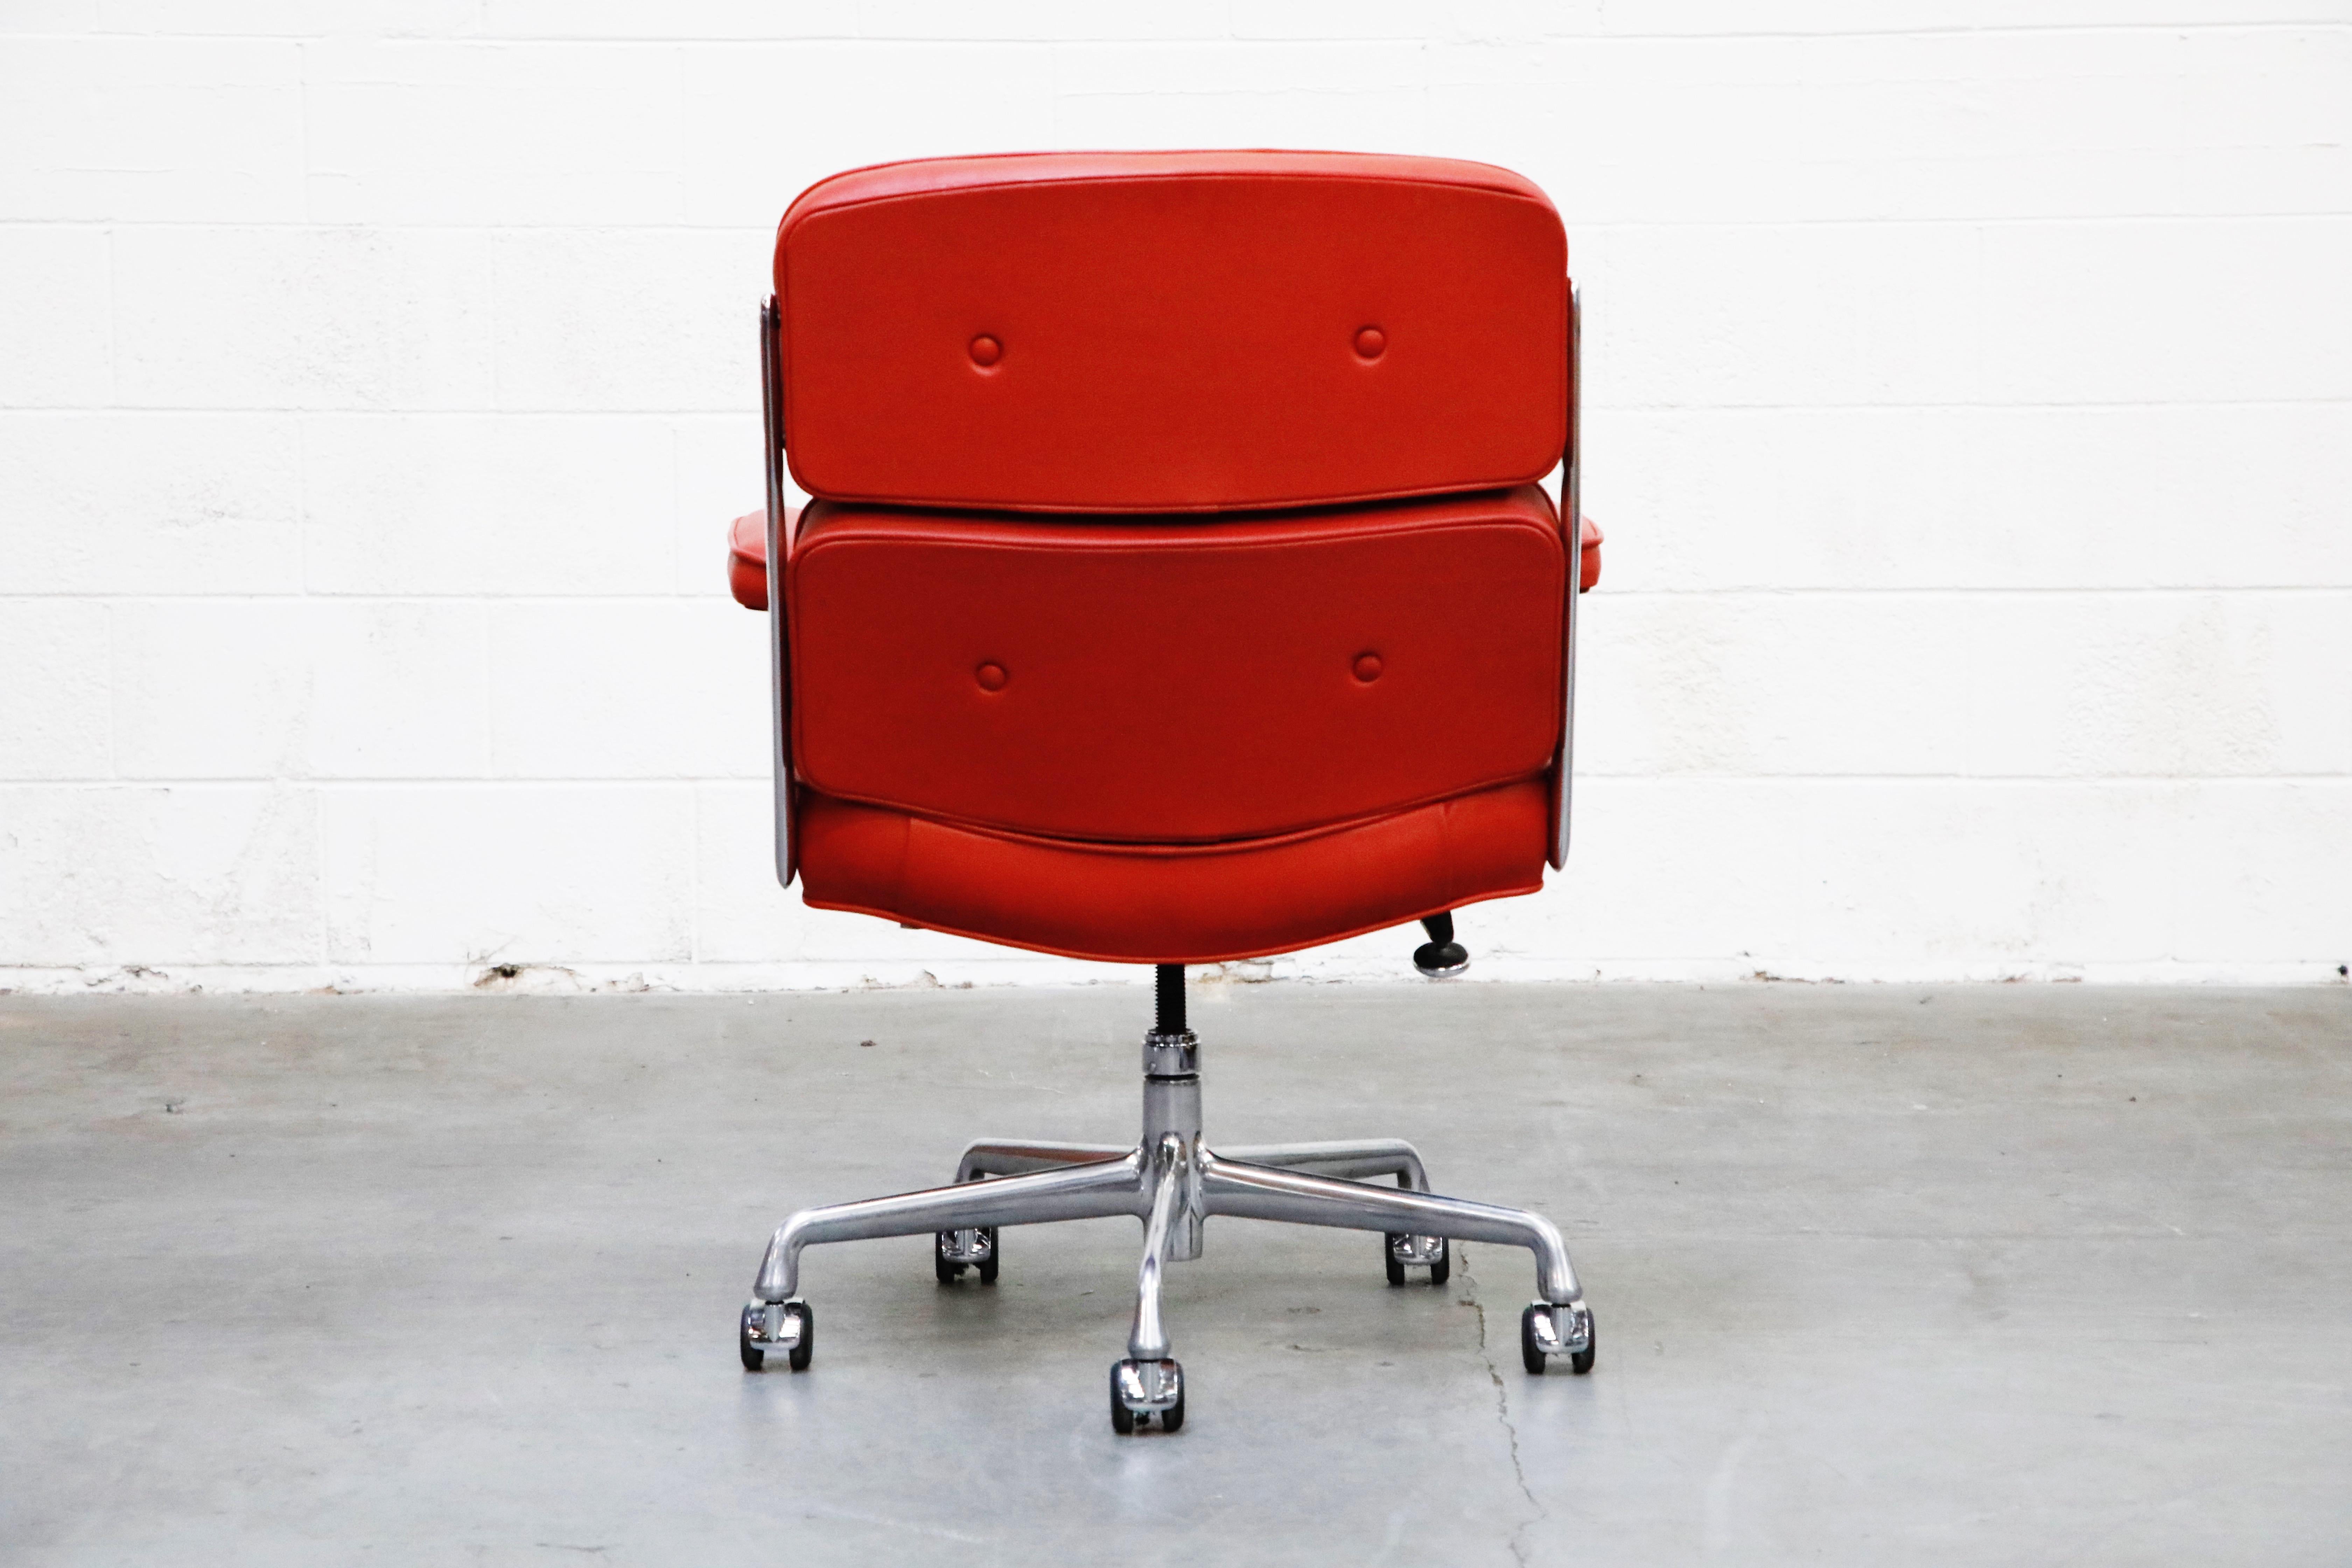 Aluminum 'Time Life' Executive Chairs by Charles Eames for Herman Miller, 2011, Signed